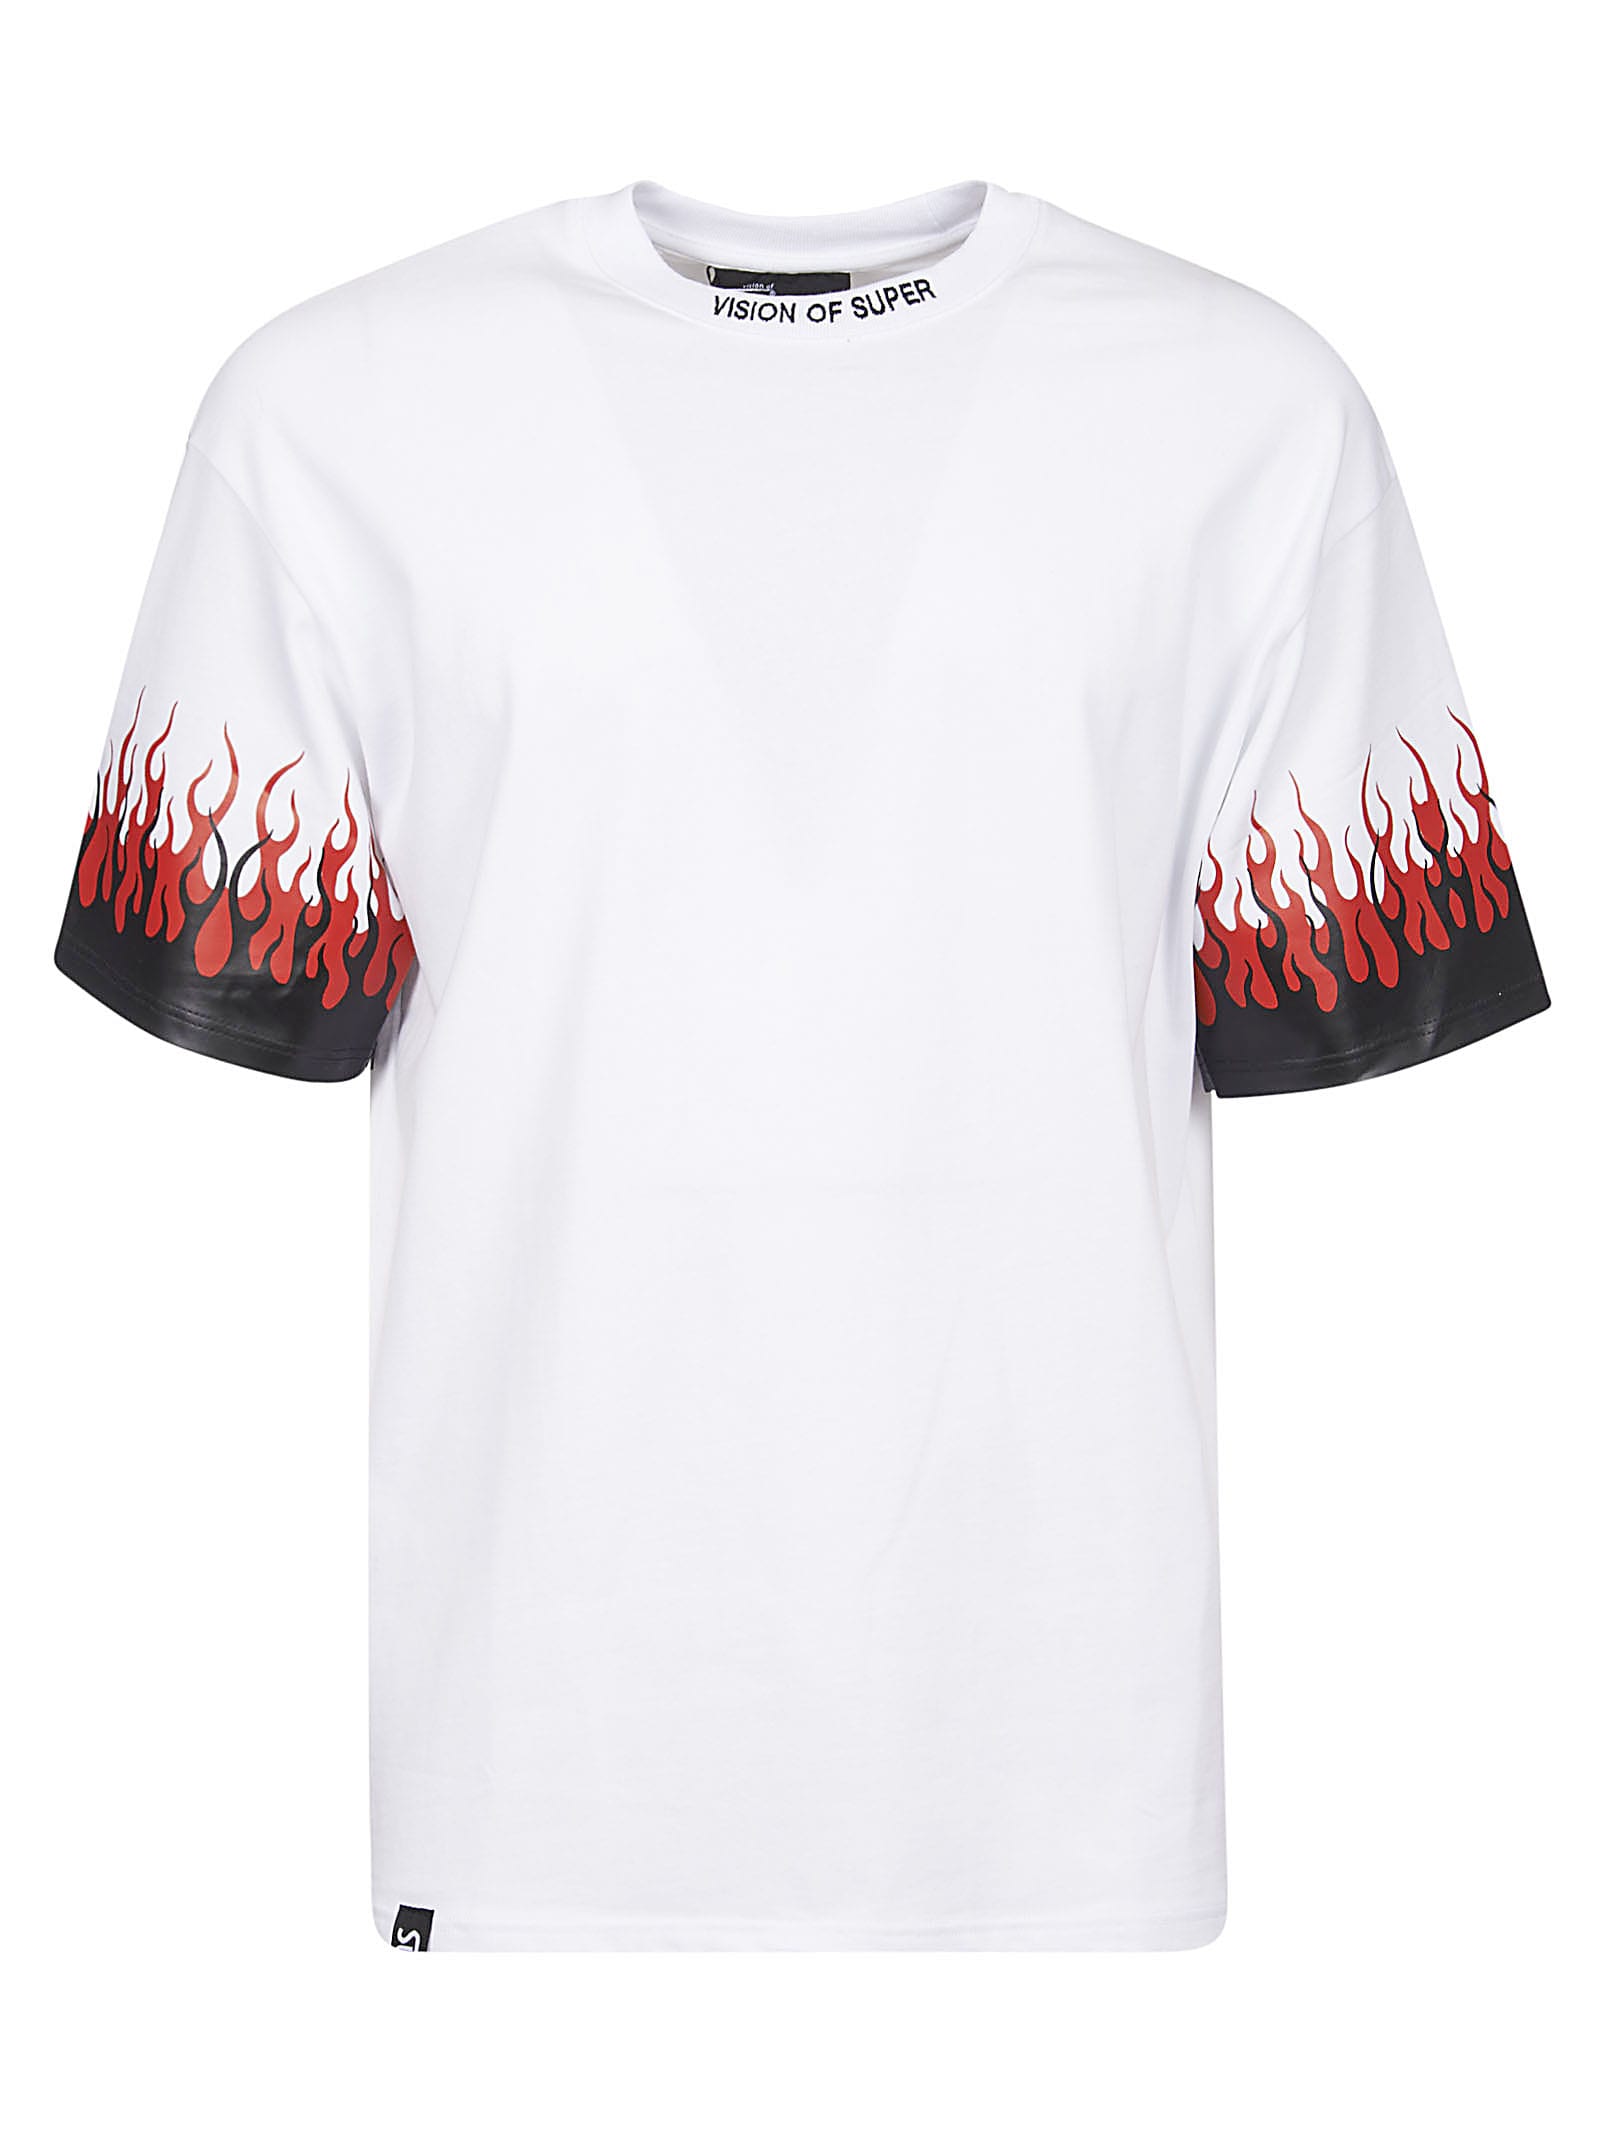 VISION OF SUPER FLAME T-SHIRT,W1DOUBLE BIANCO